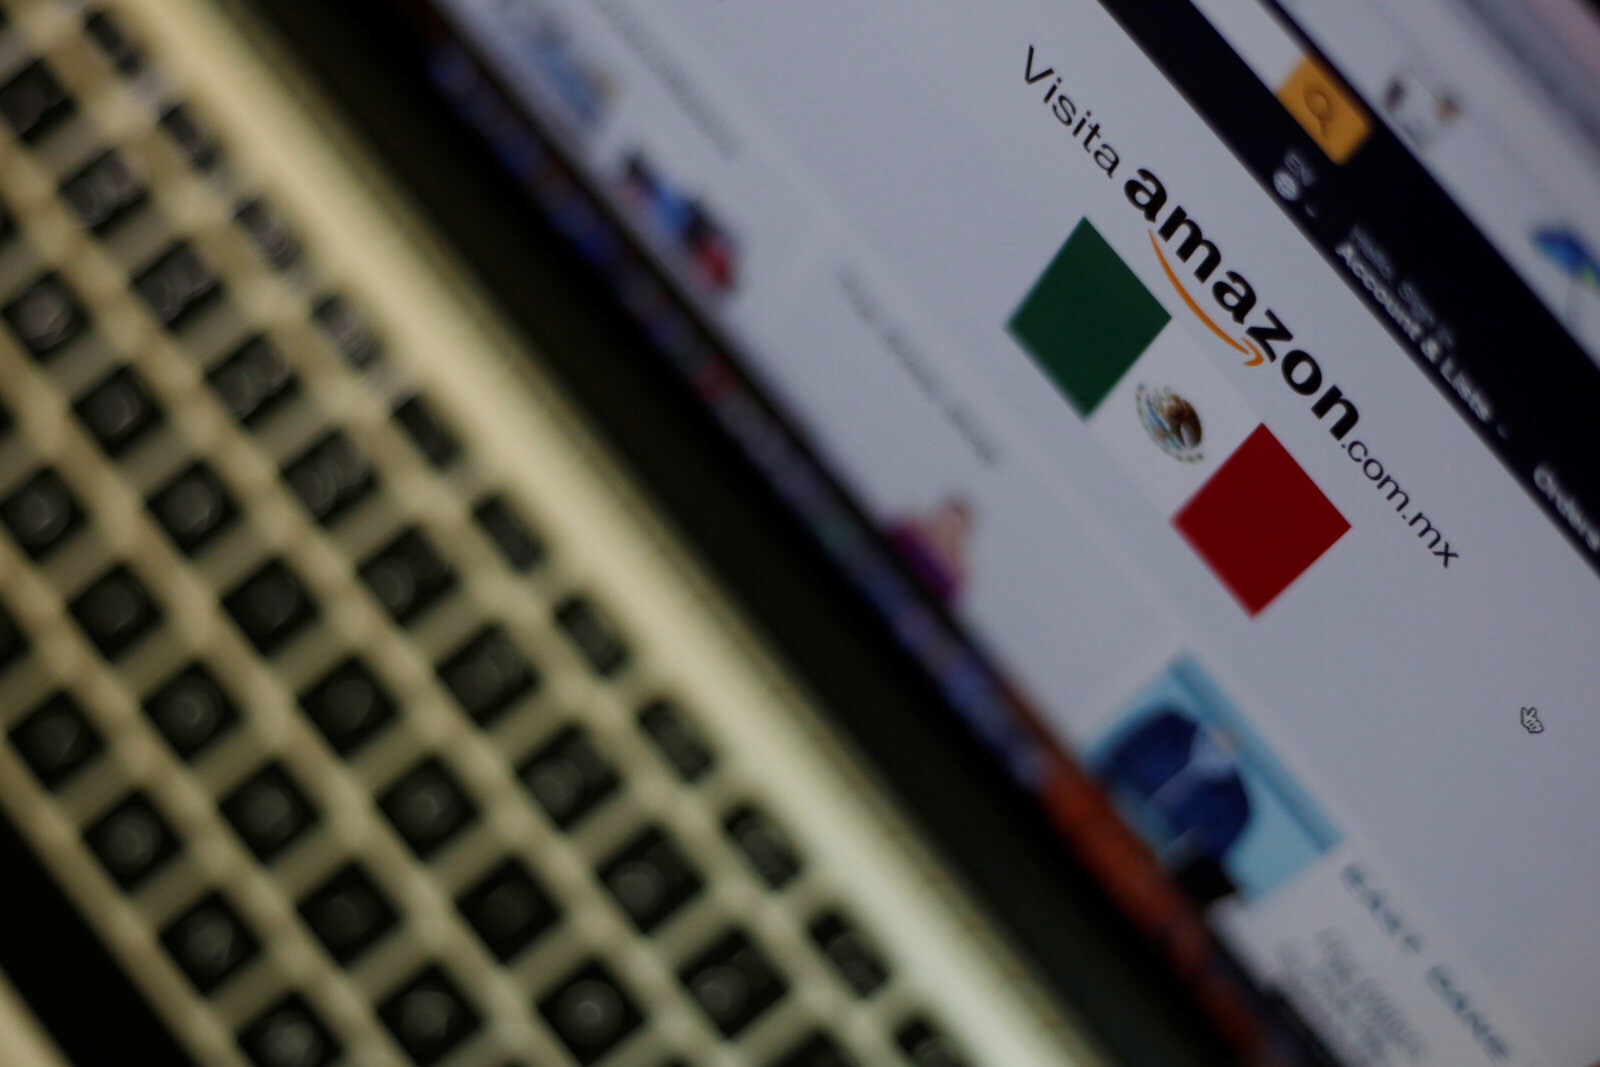 Amazon Rechargeable, replacement for conventional credit and debit card, arrives in Mexico